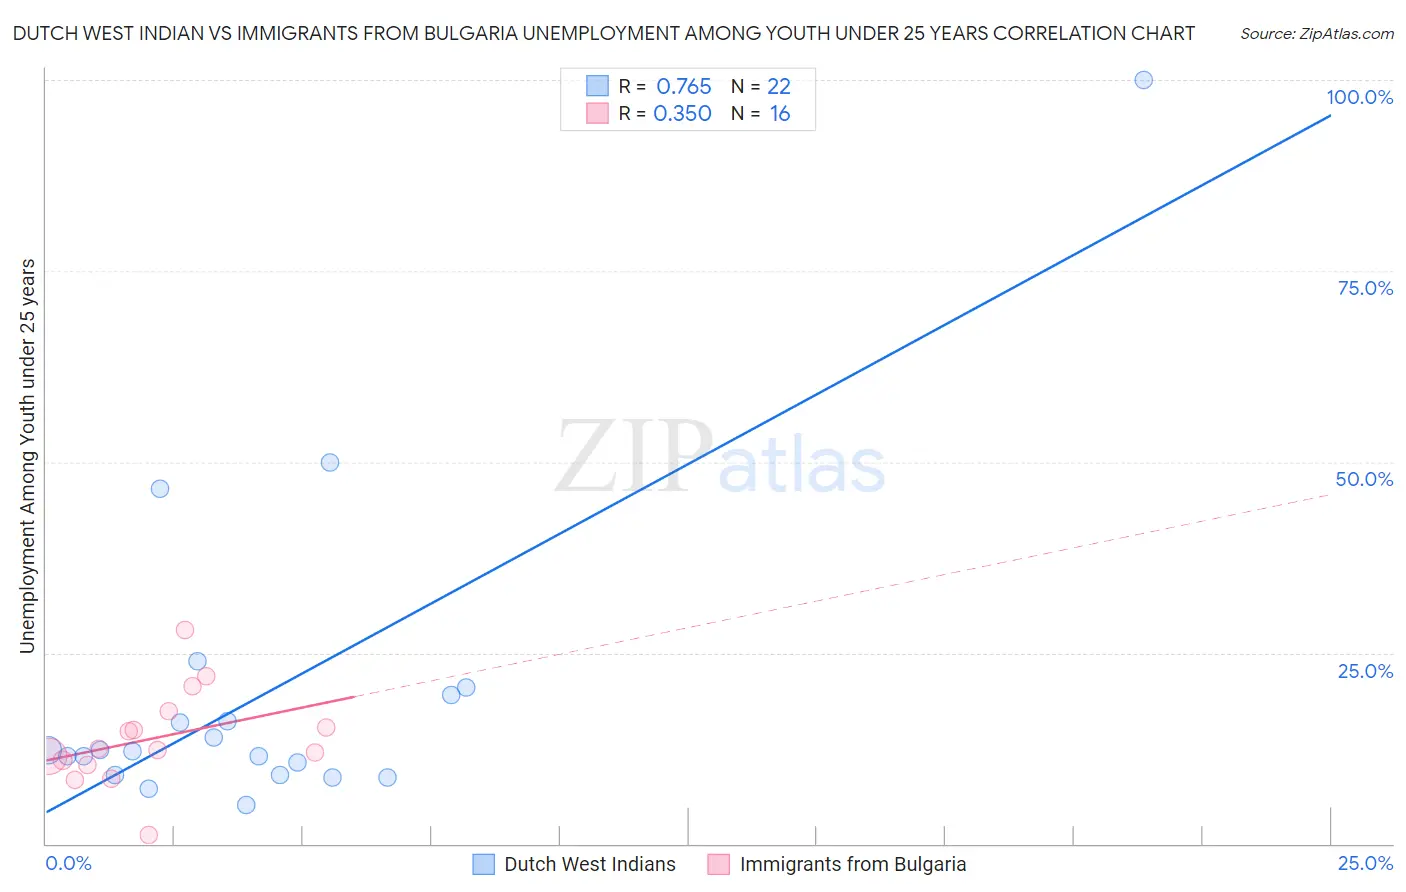 Dutch West Indian vs Immigrants from Bulgaria Unemployment Among Youth under 25 years